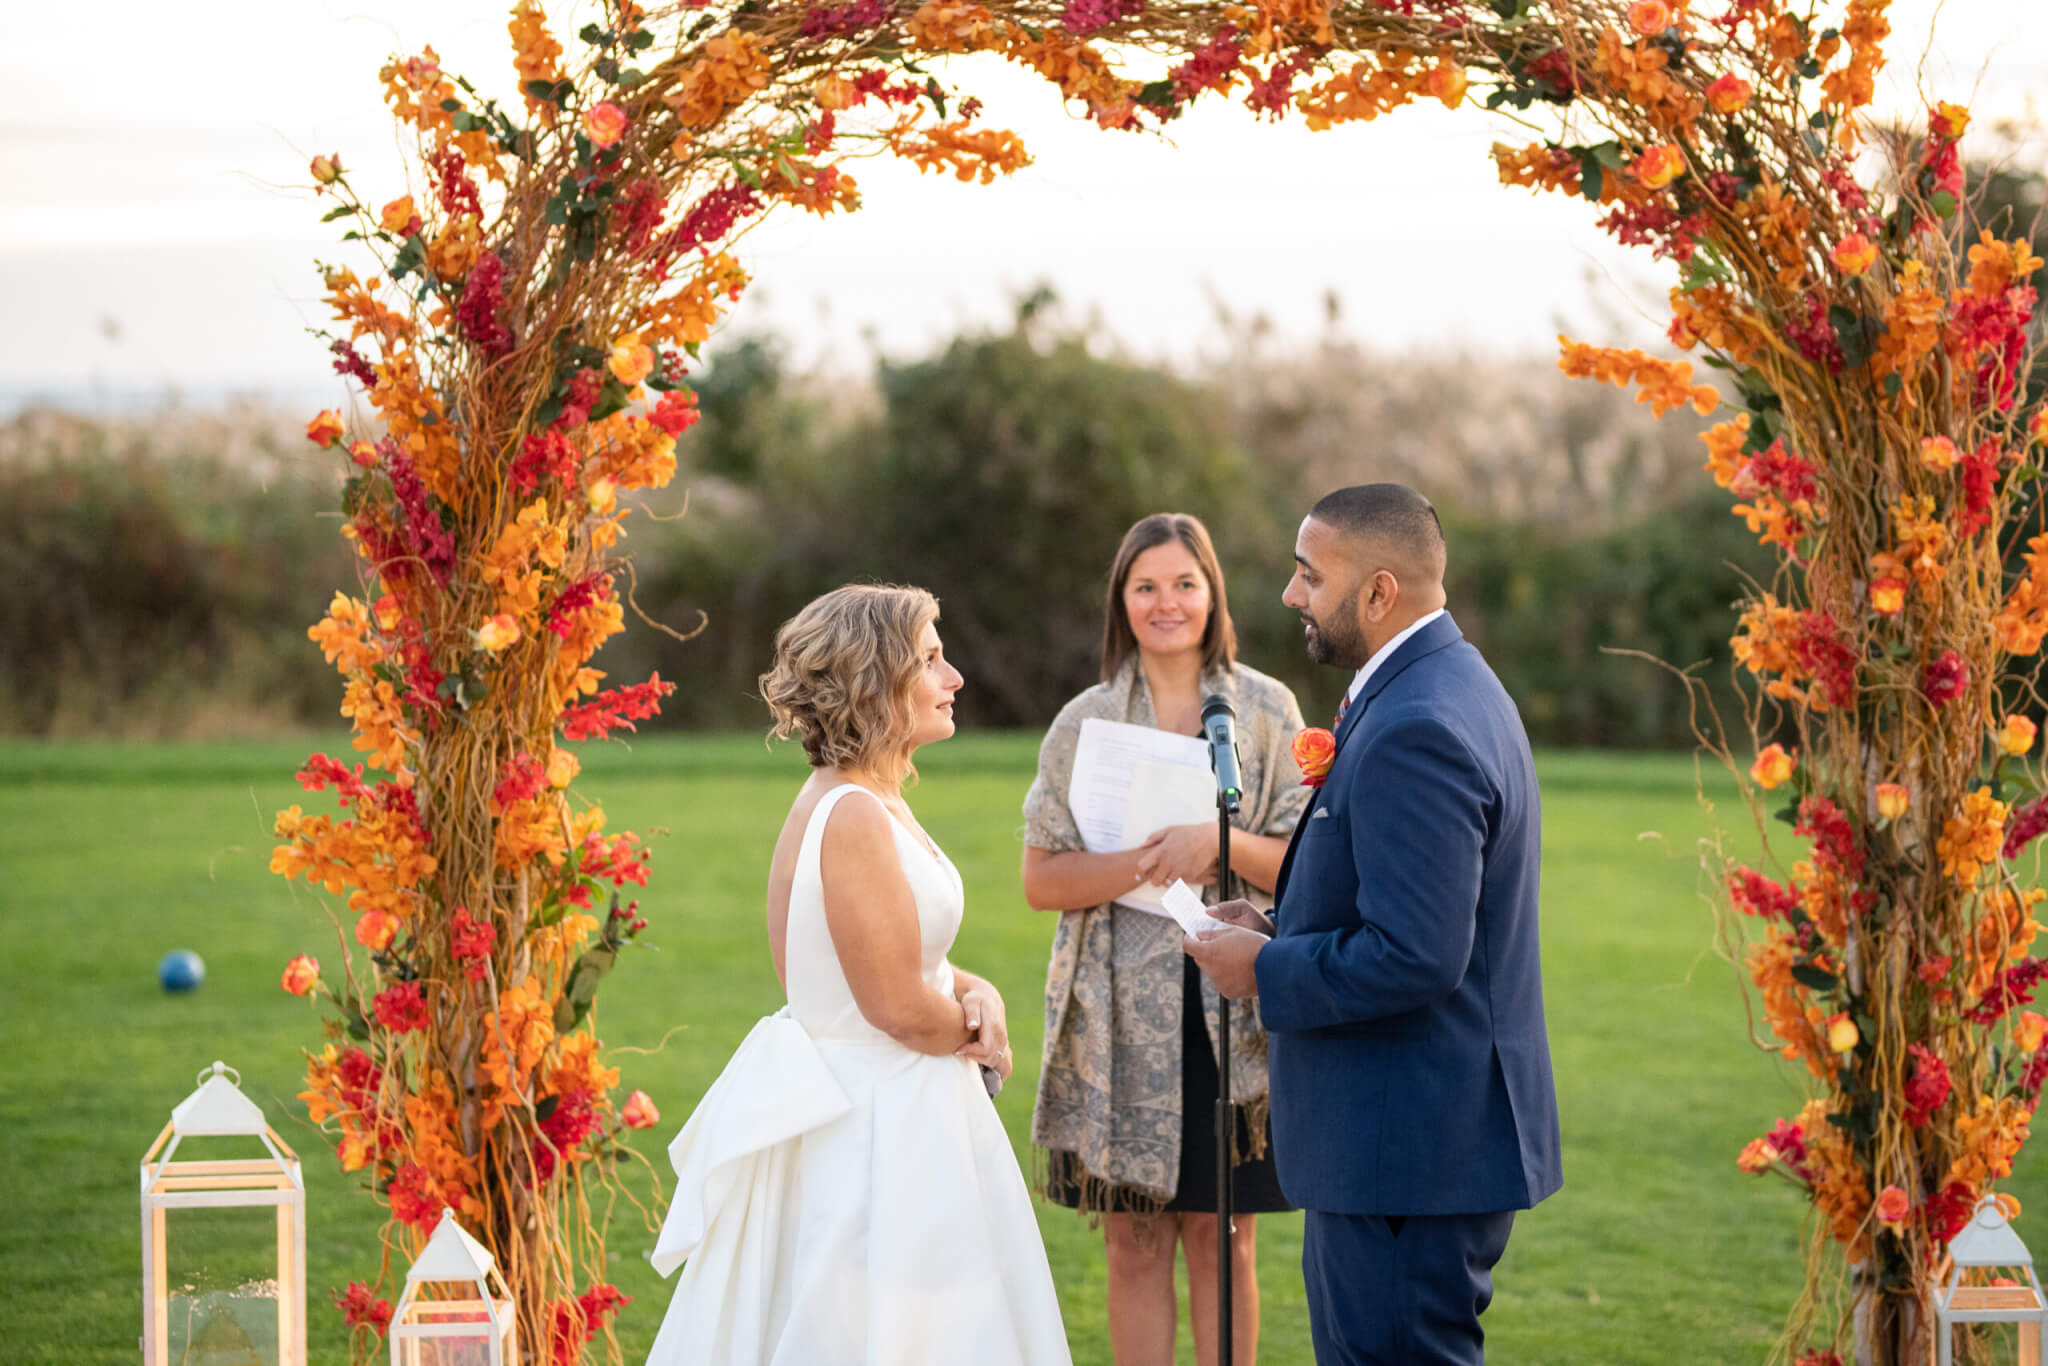 14 Questions to Ask When Hiring an Officiant